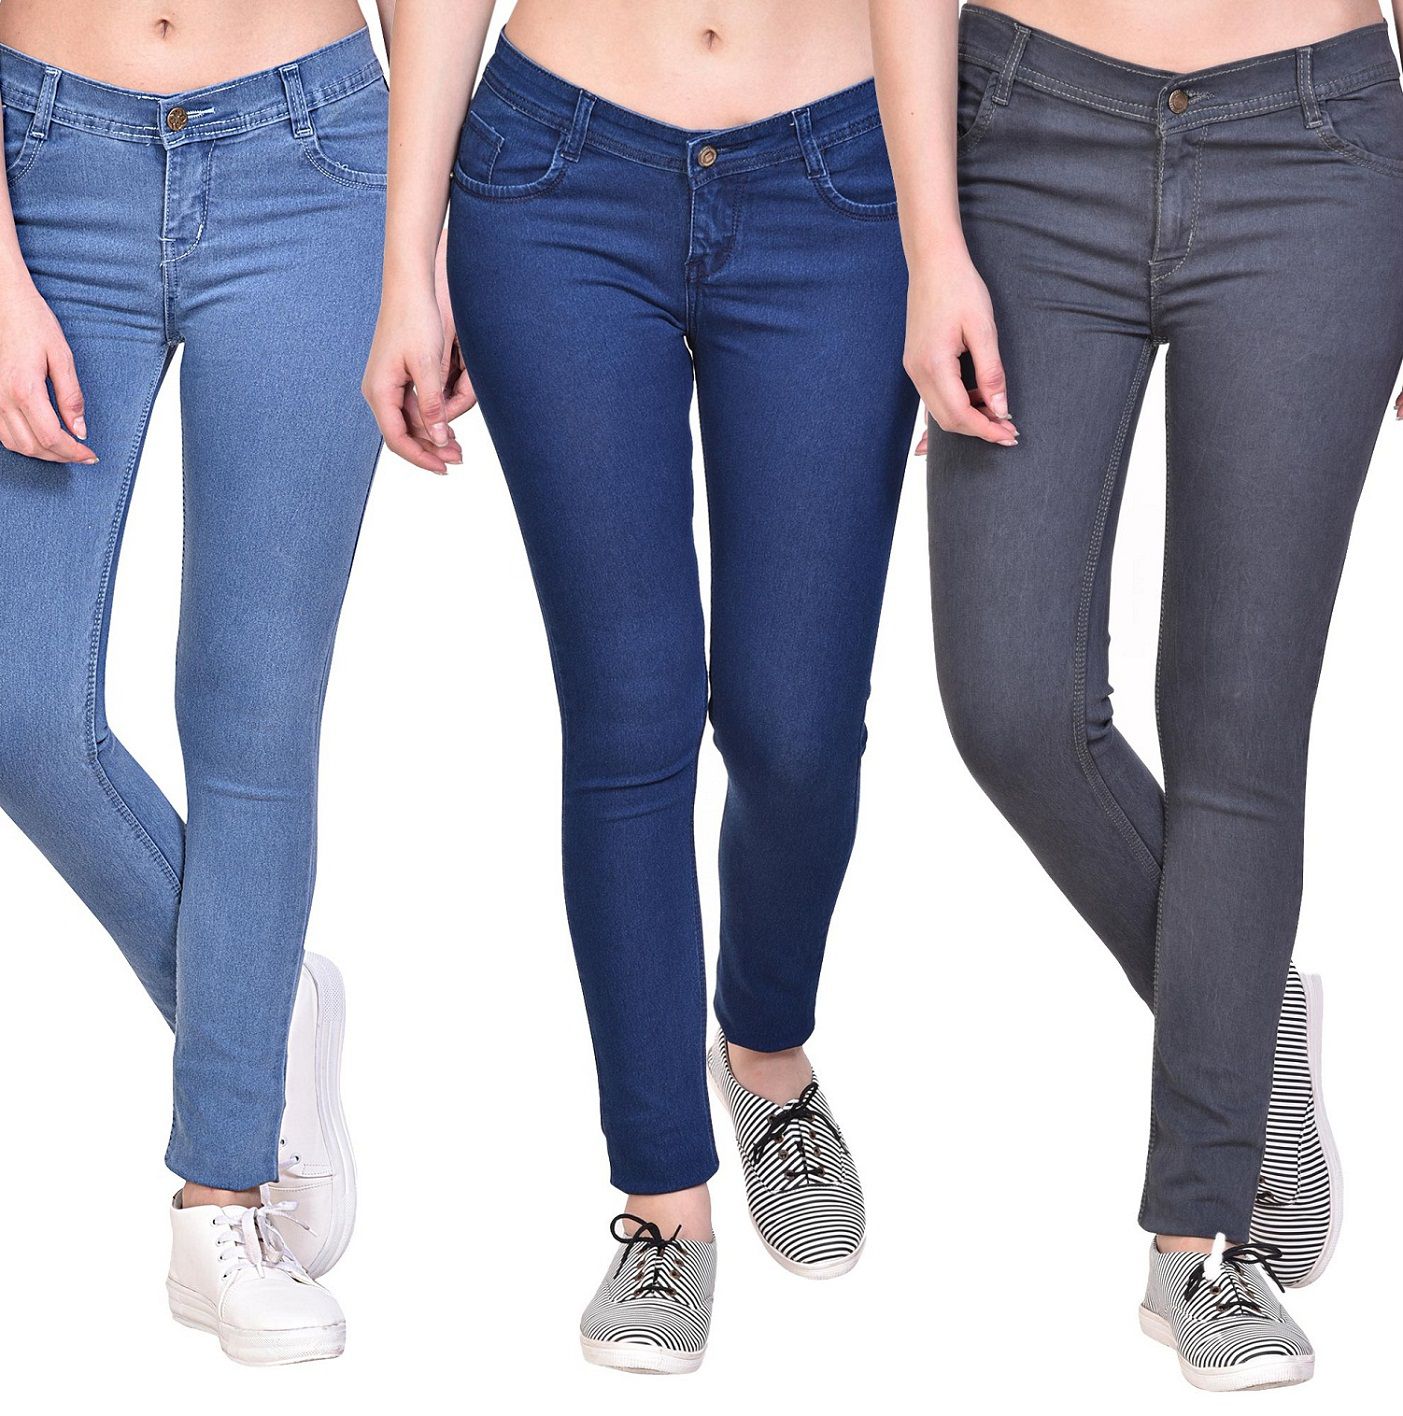 Buy NJs Denim Jeans Multi Color Online at Best Prices in India Snapdeal